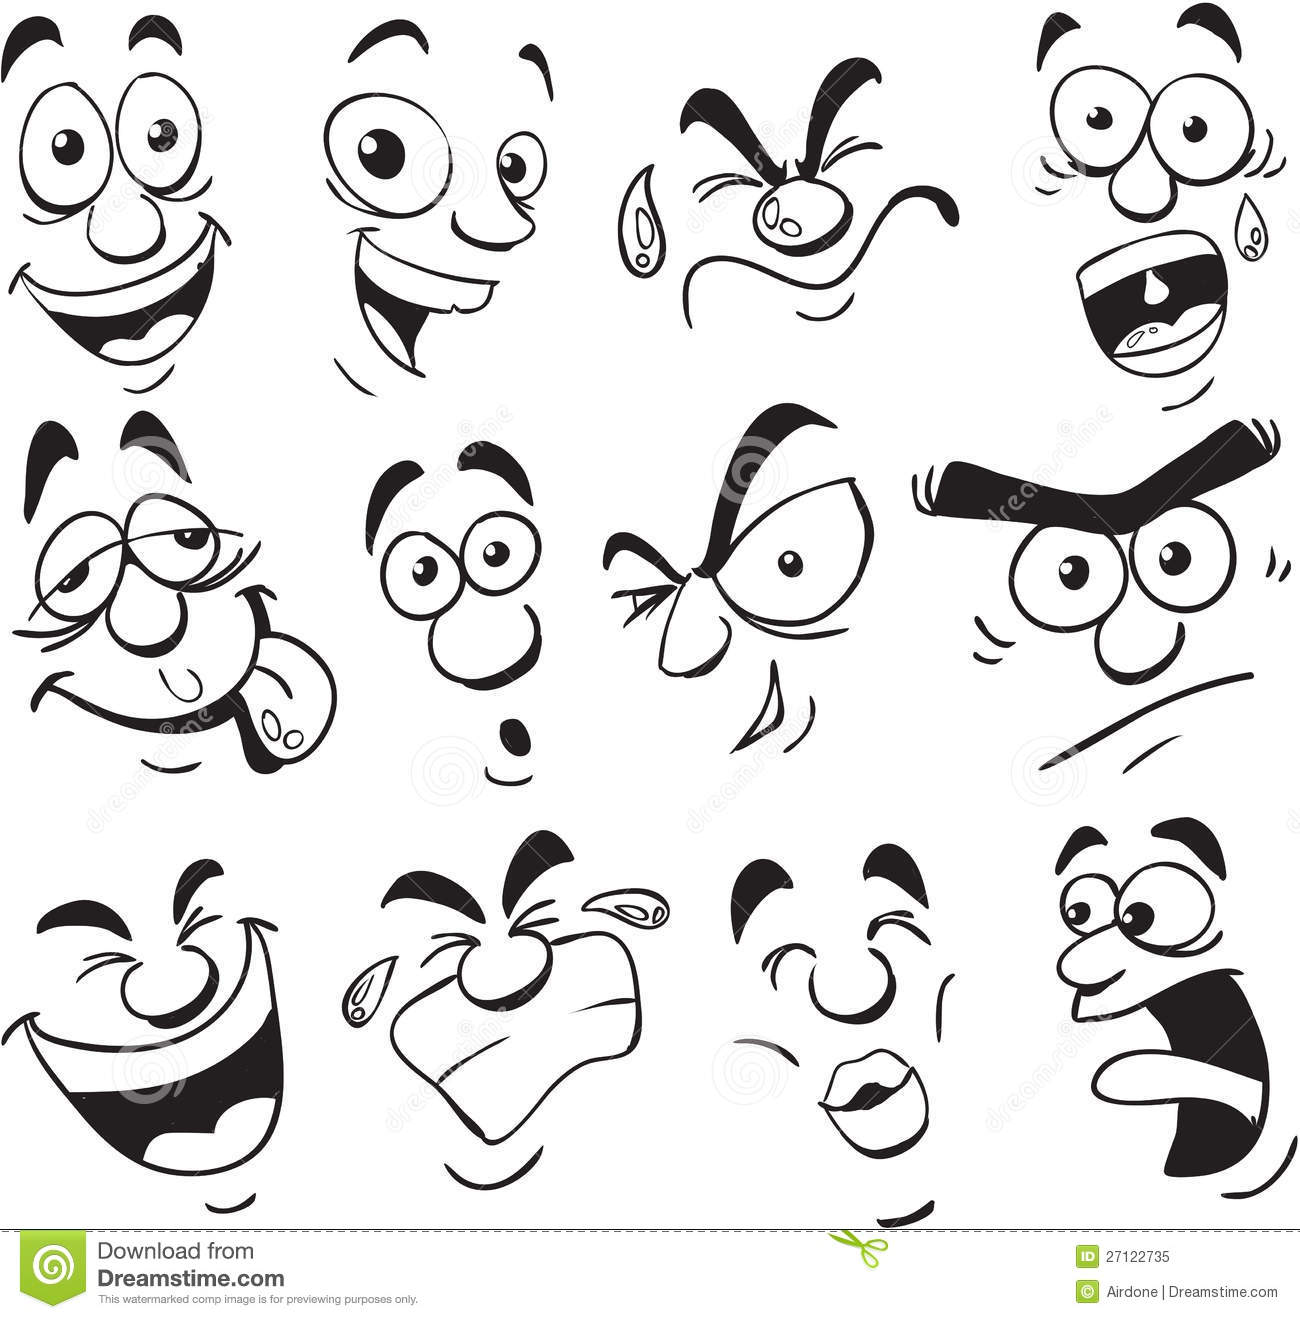 Expressions clipart.